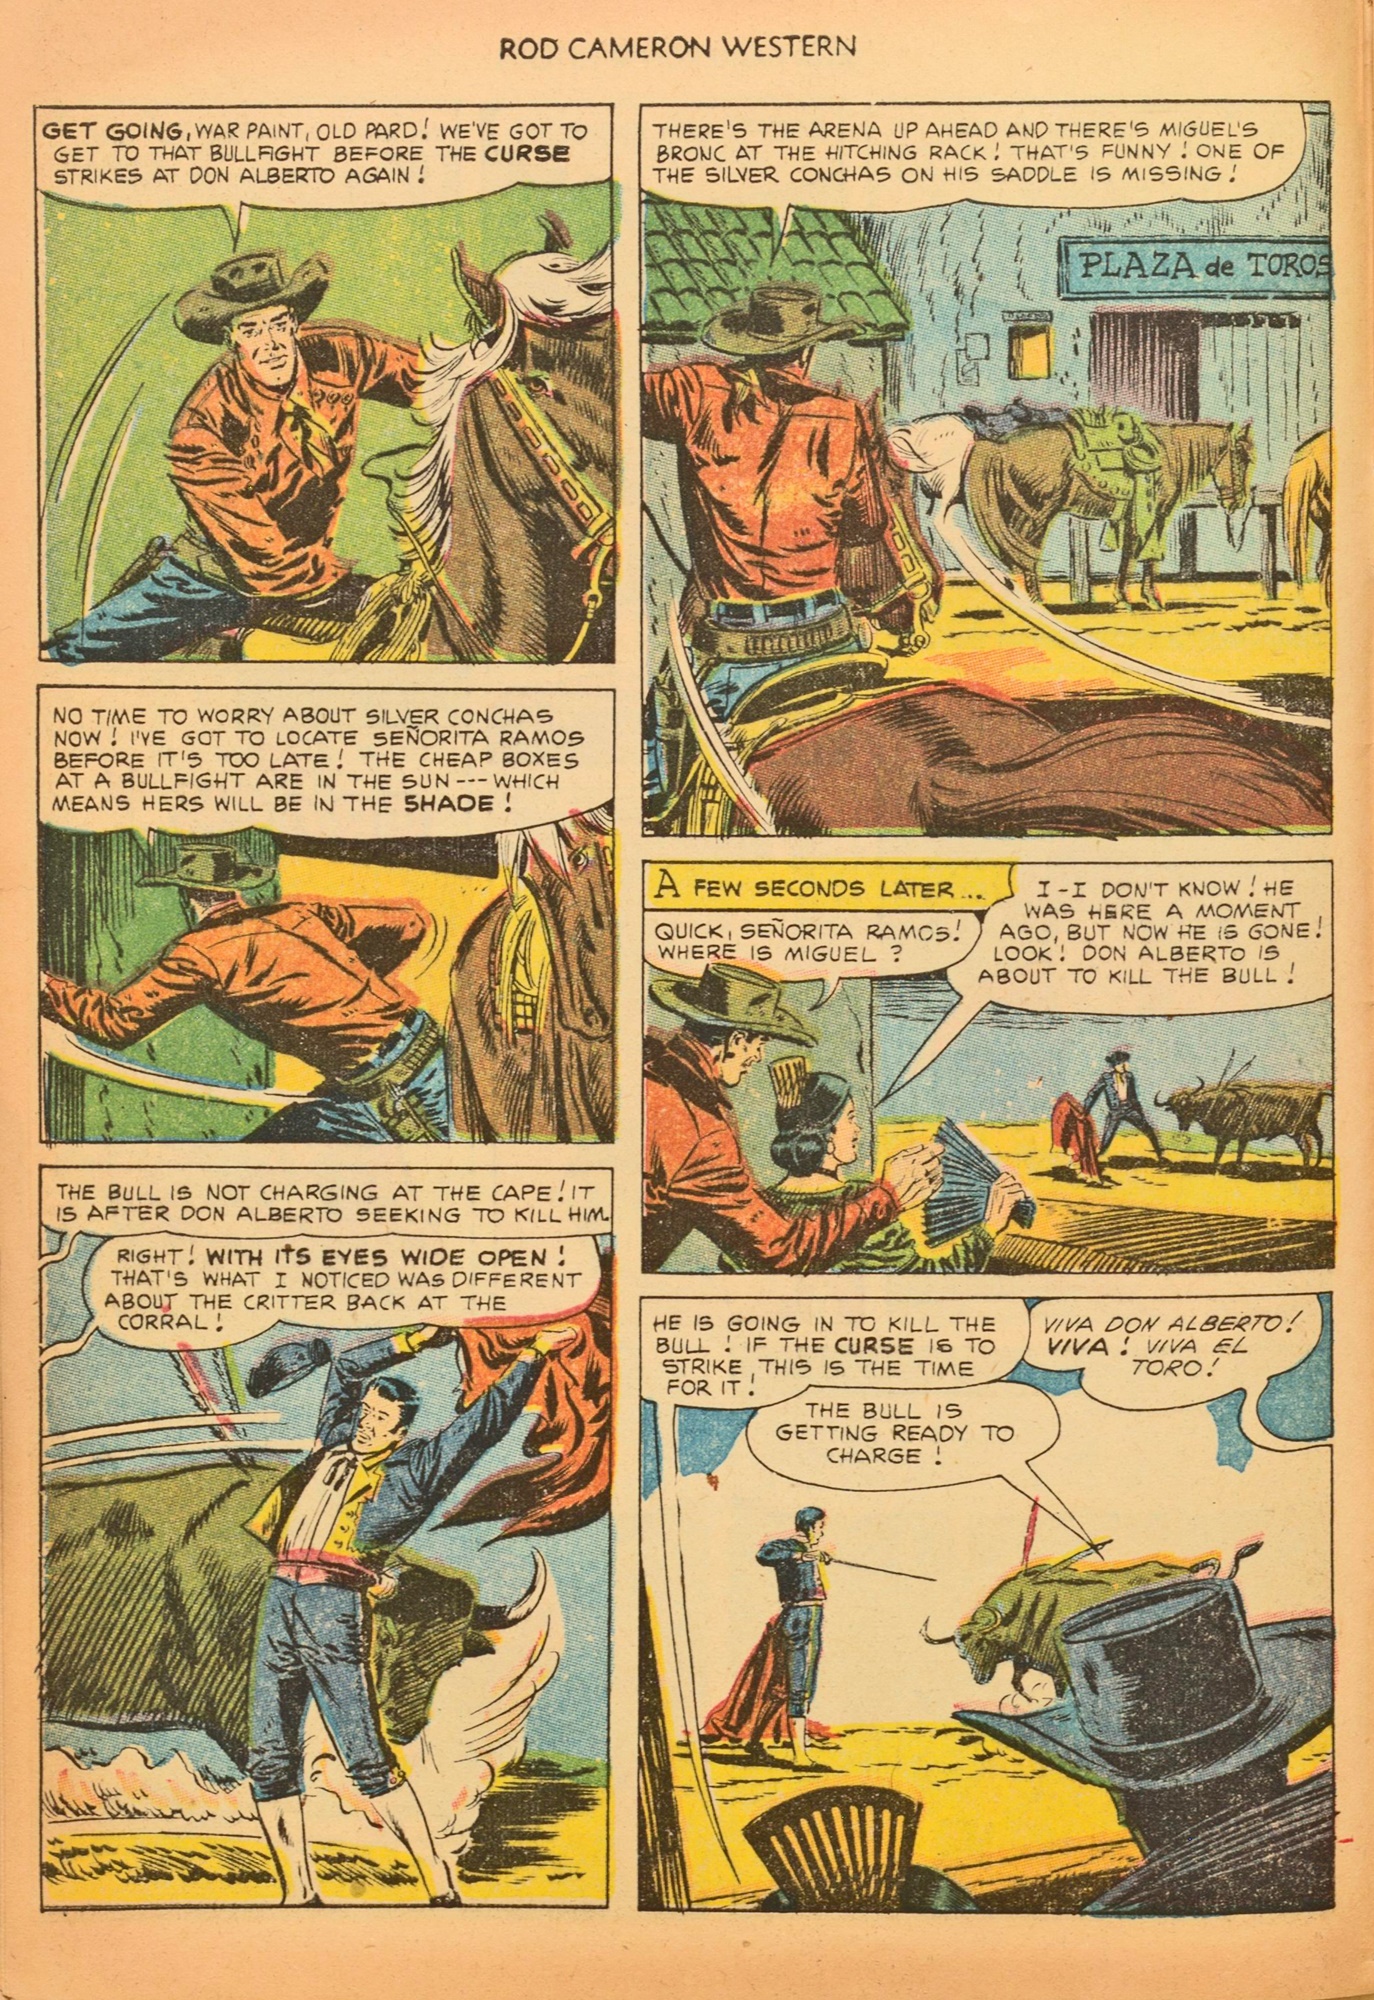 Read online Rod Cameron Western comic -  Issue #19 - 8